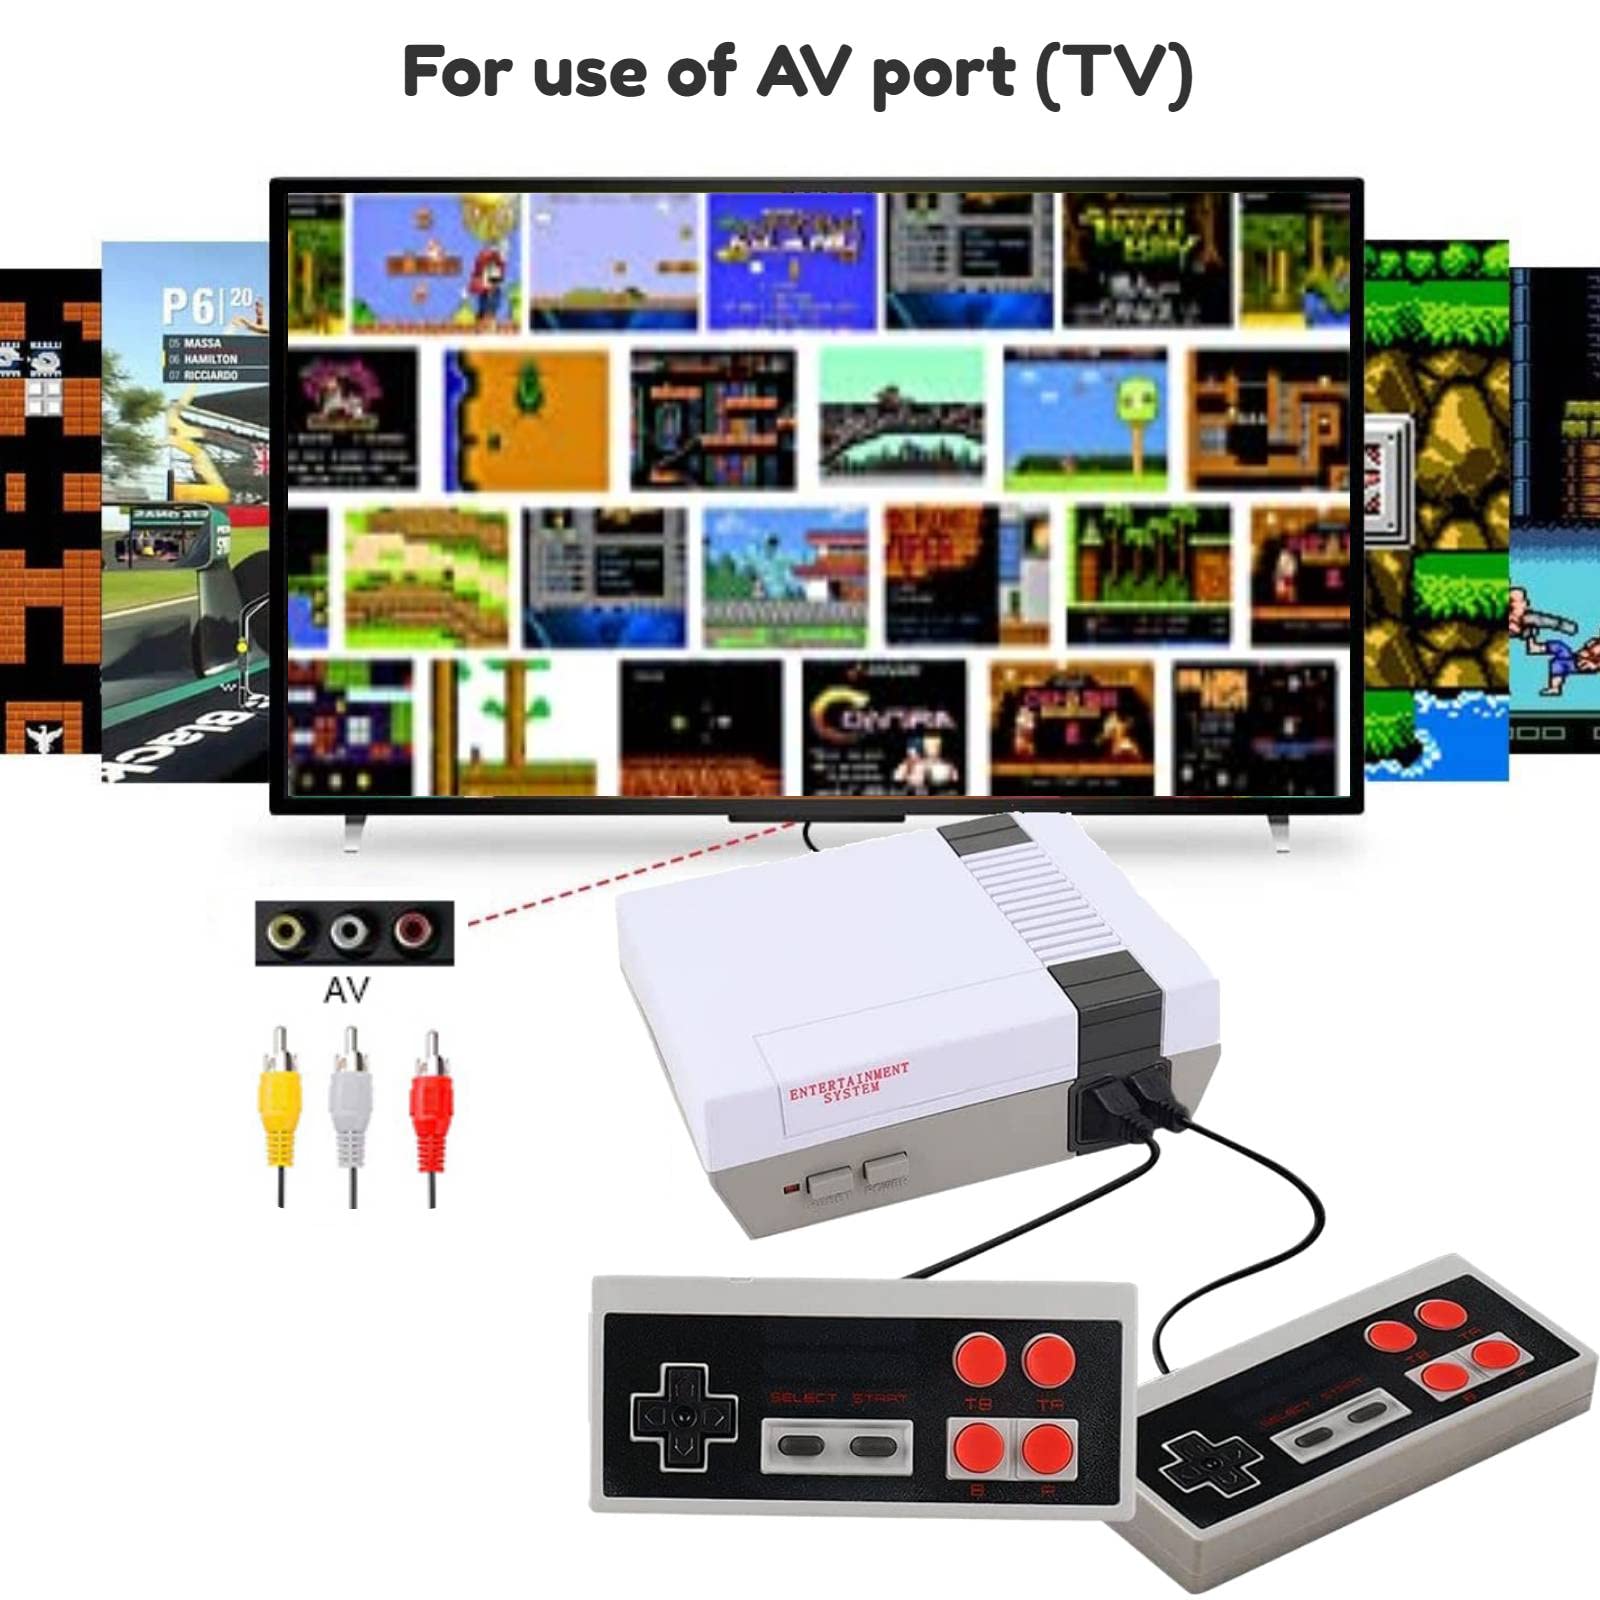 Retro Classic Game Console,Classic Video Games System Built-in 620 Games and 2 Classic Edition Controllers,Av Output Plug and Play,Retro Toys